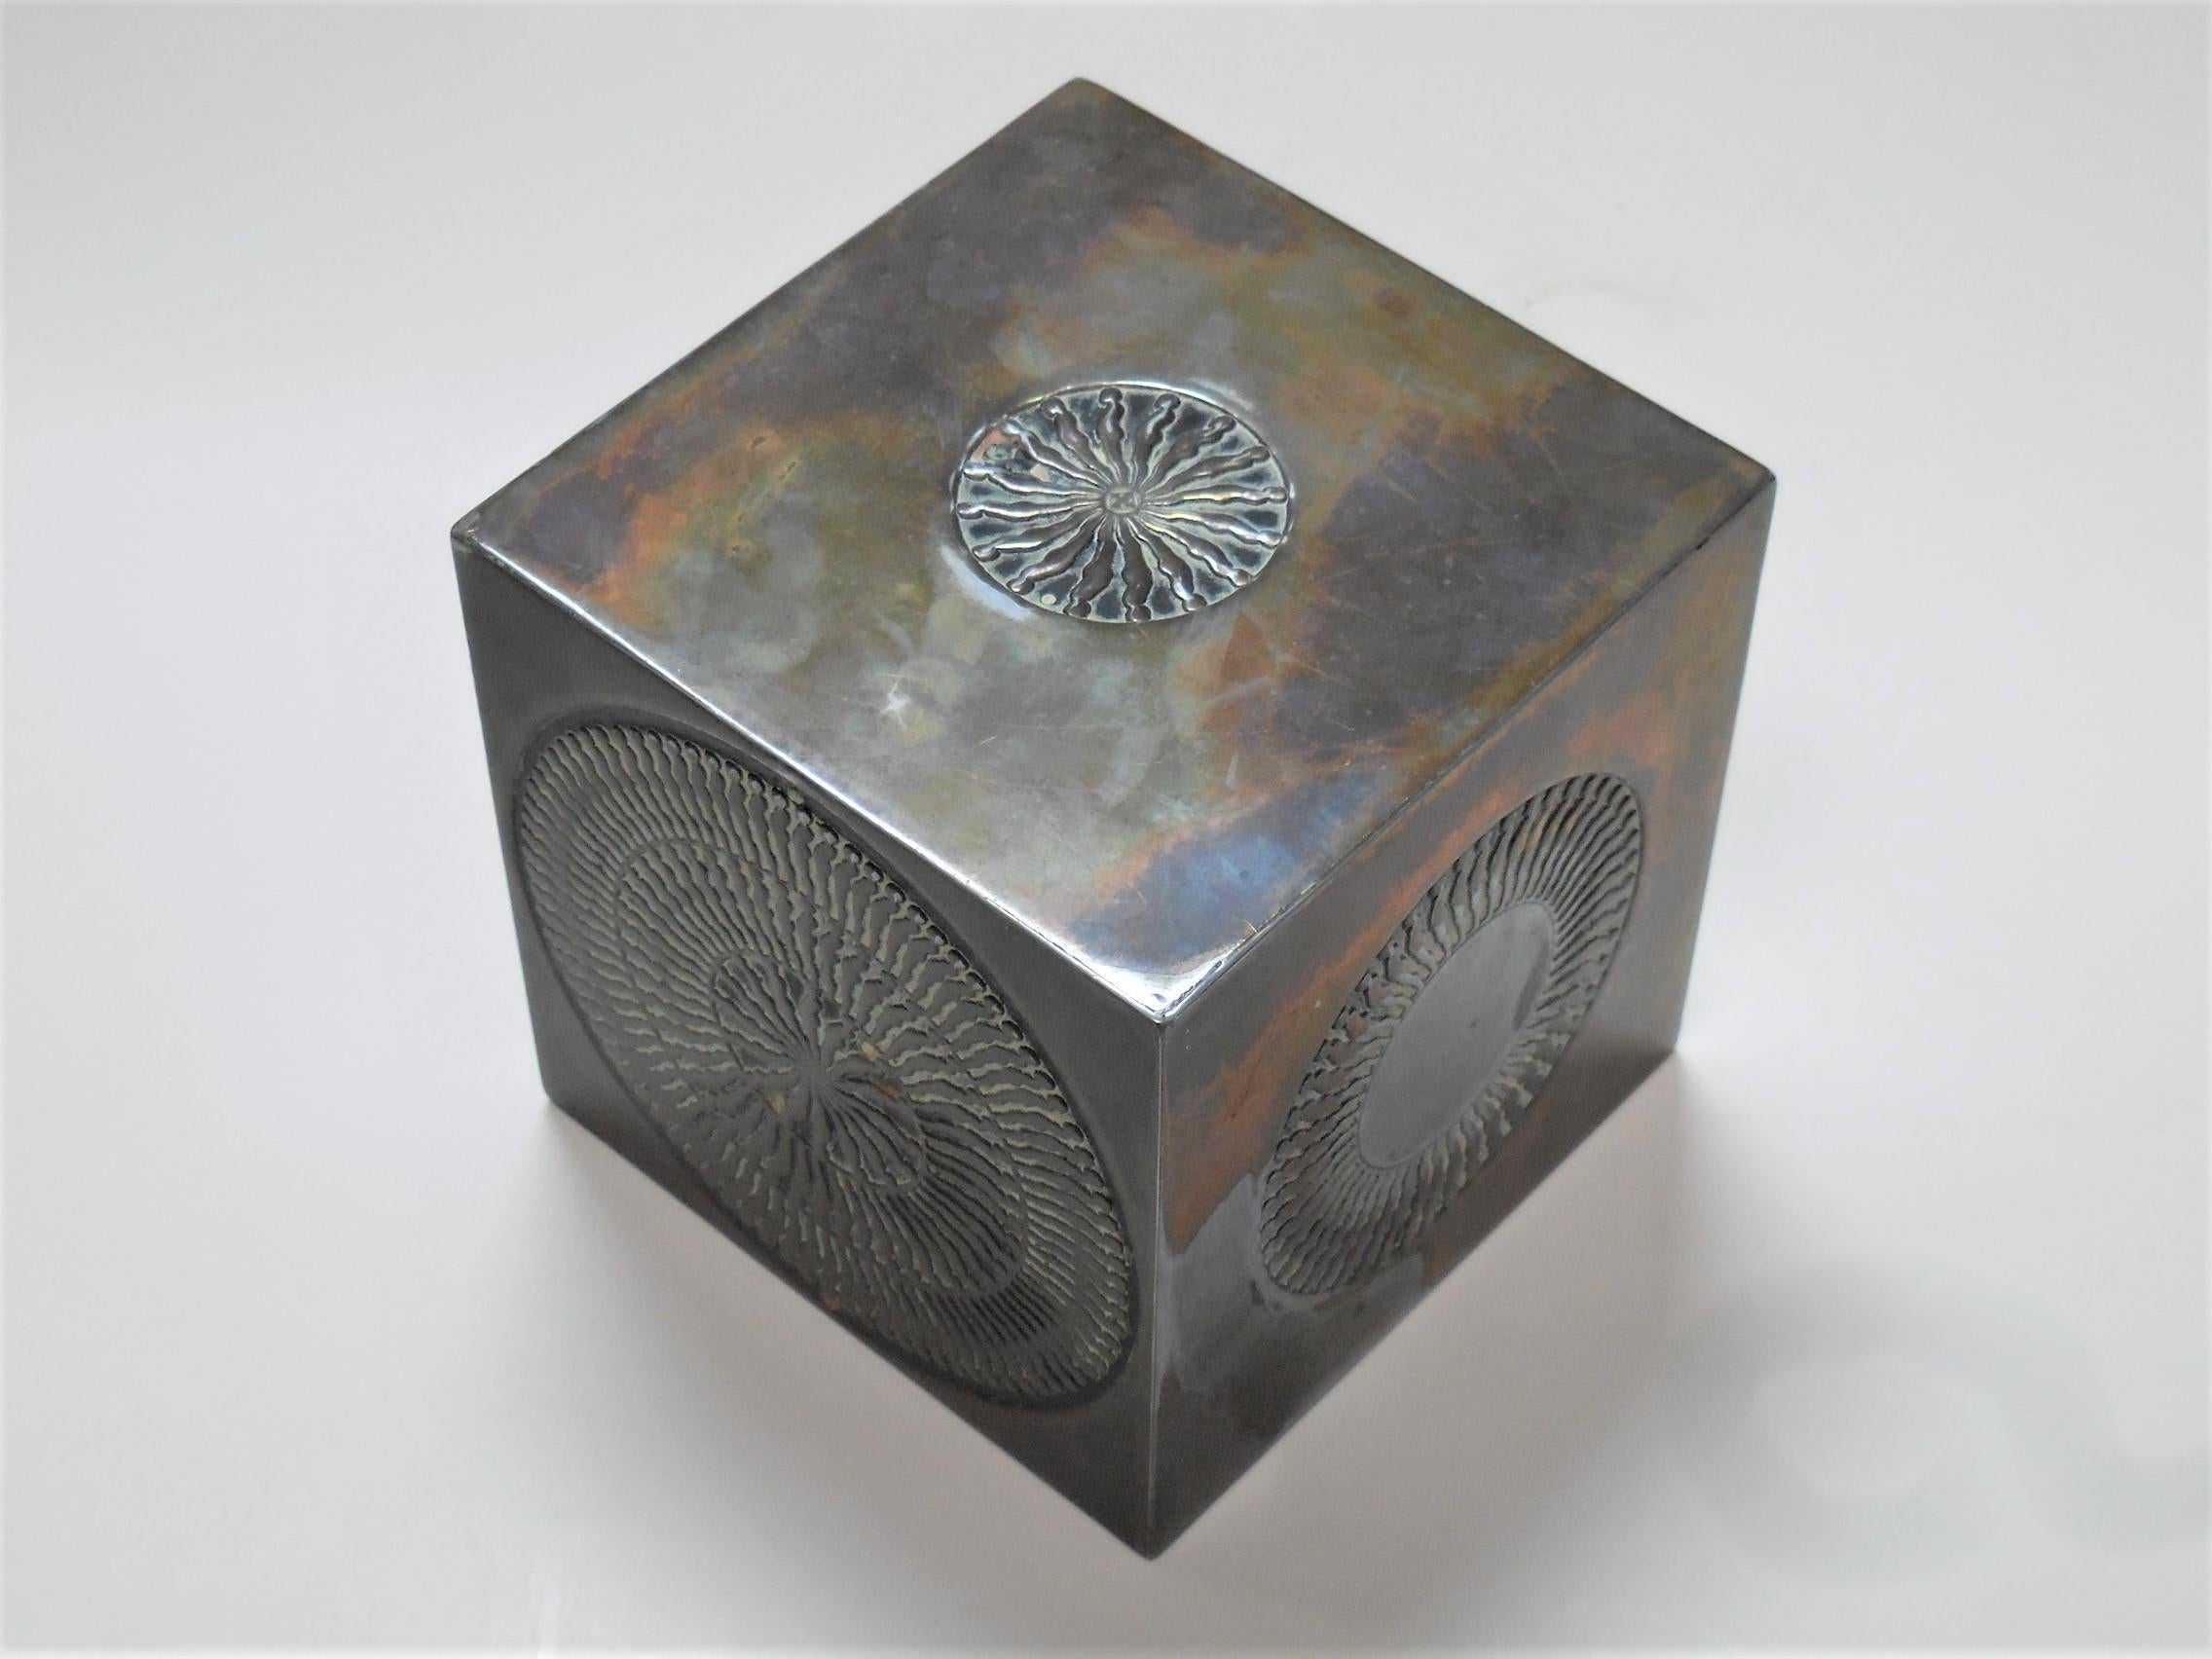 A cube sculpure by Trova. It is bronze with a worn nickel plated finish. All surfaces include representations of his iconic falling man within a circle.